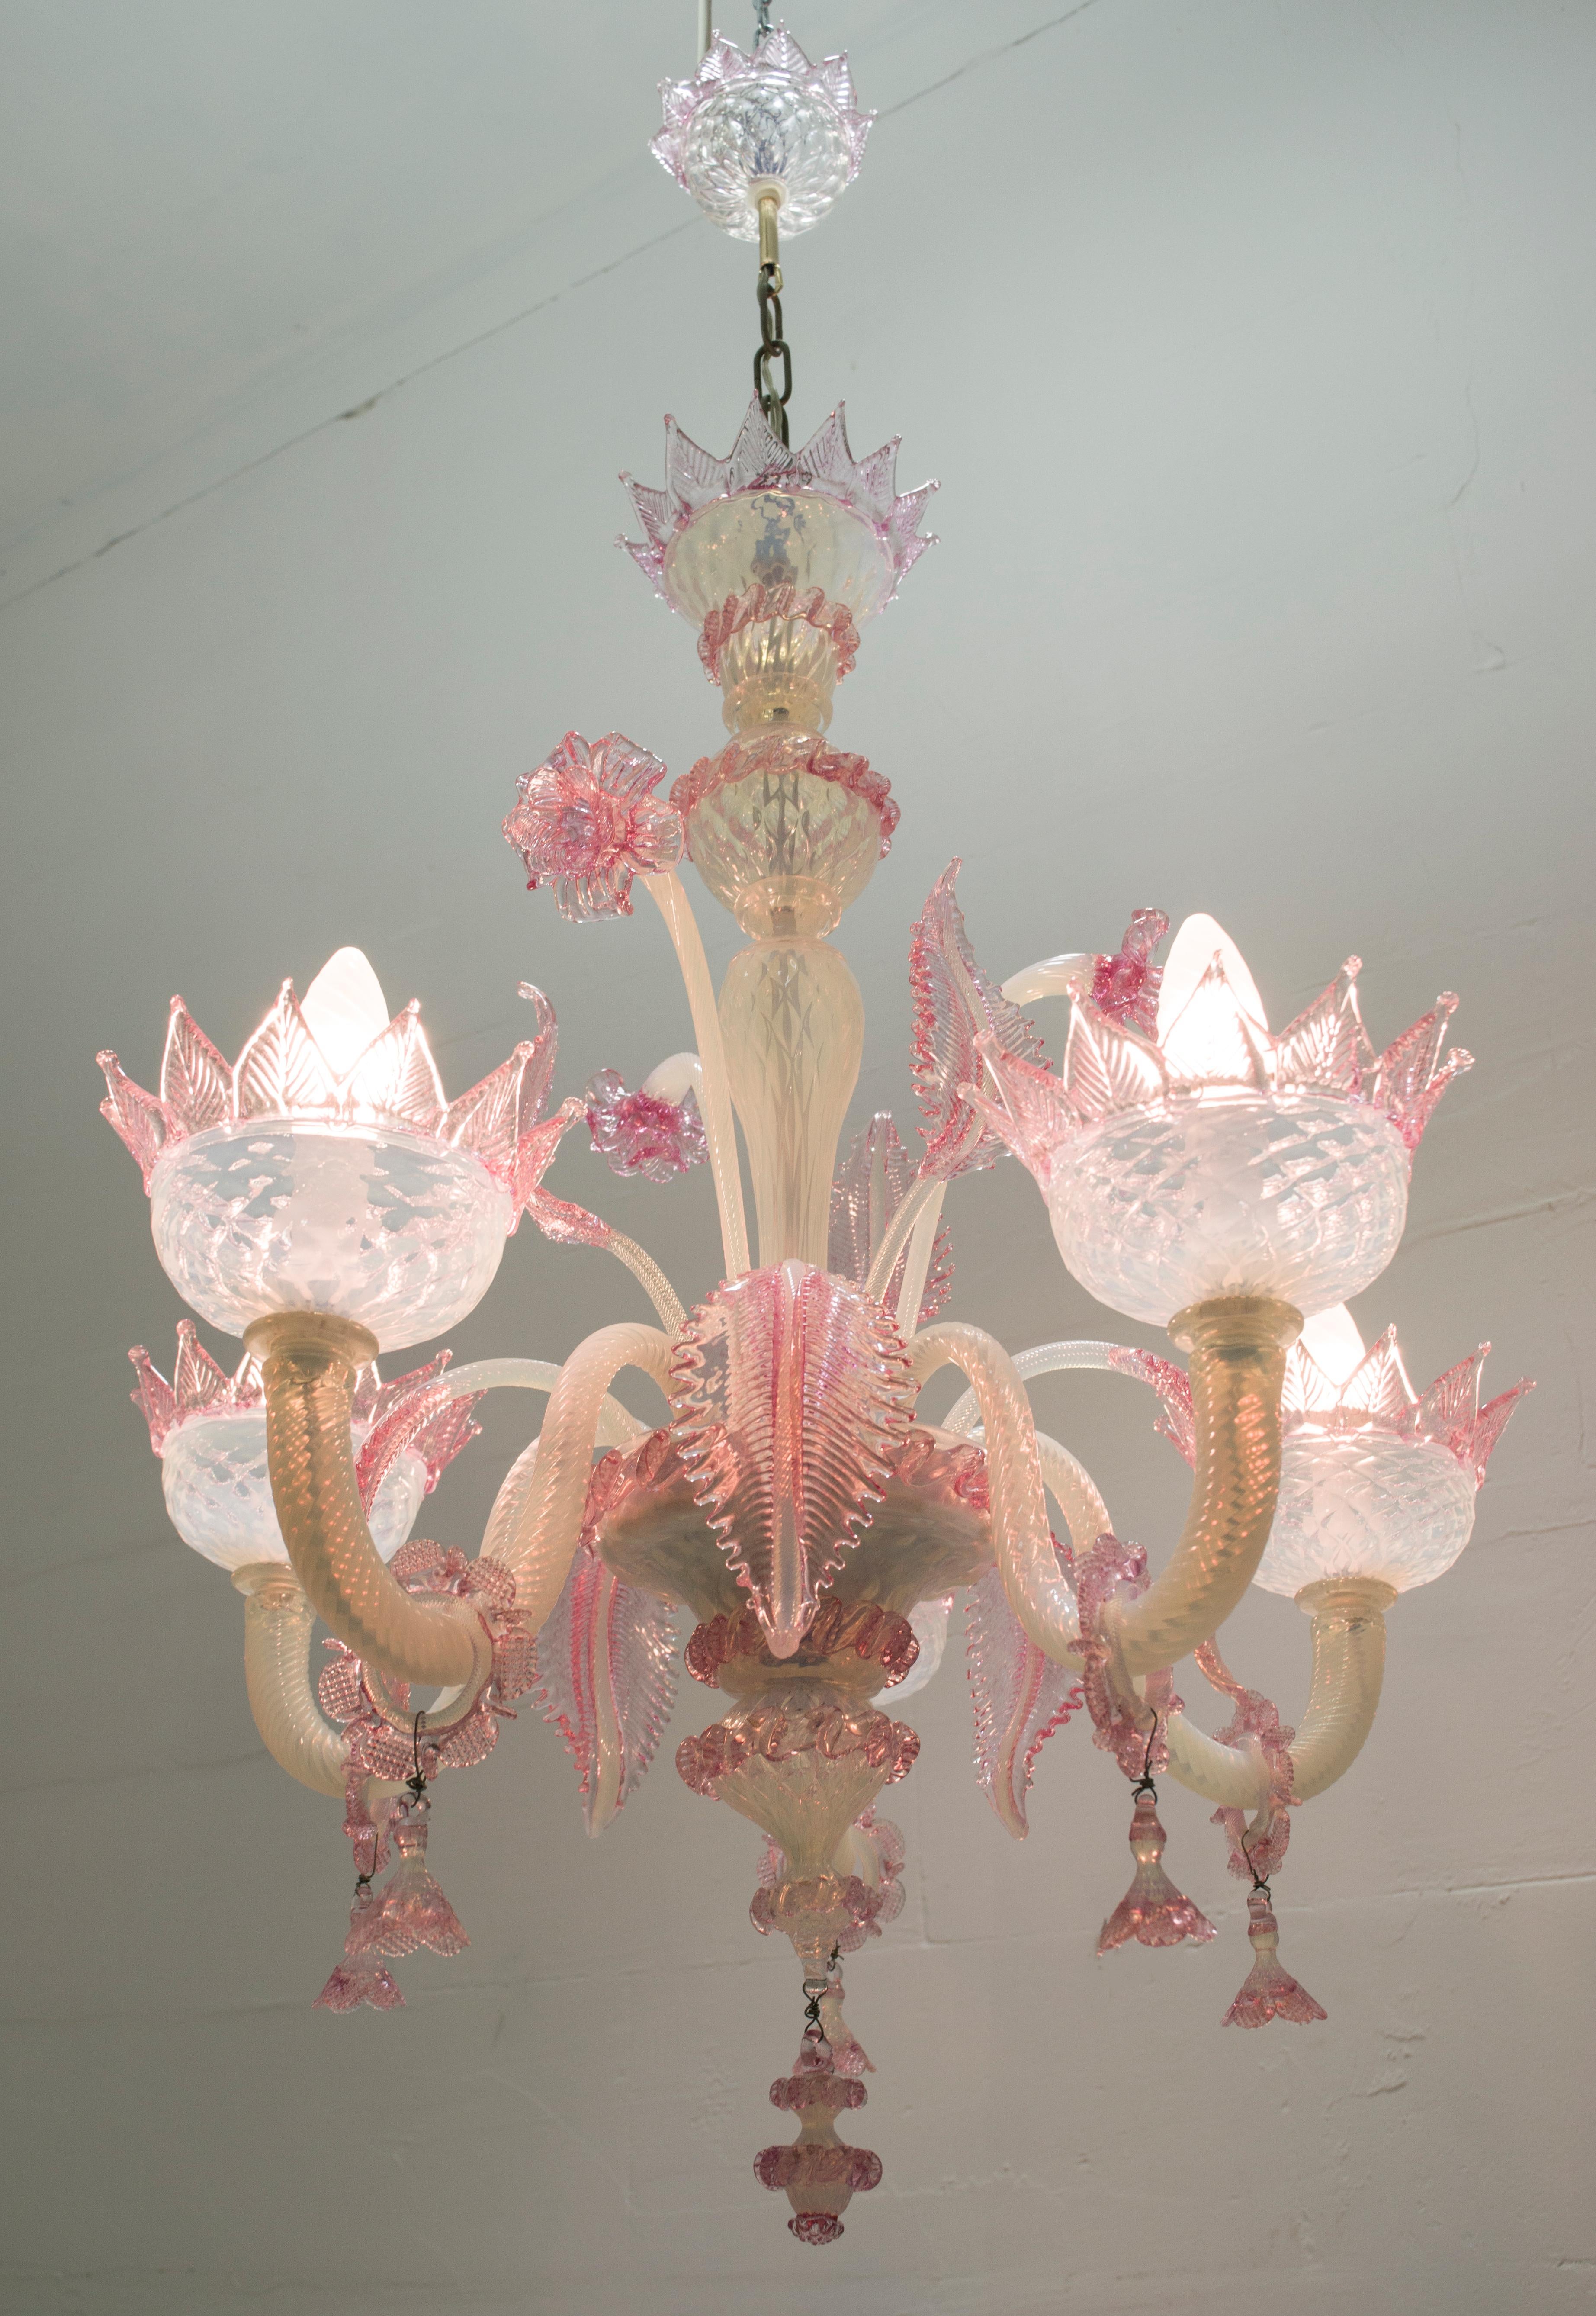 An elegant five-light chandelier in Murano glass with transparent colors and sophisticated finishes in pink and ivory. With a centered bulbous column that emits branches and flowers and finely cuts the Murano glass leaves.

Ca'Rezzonico is the